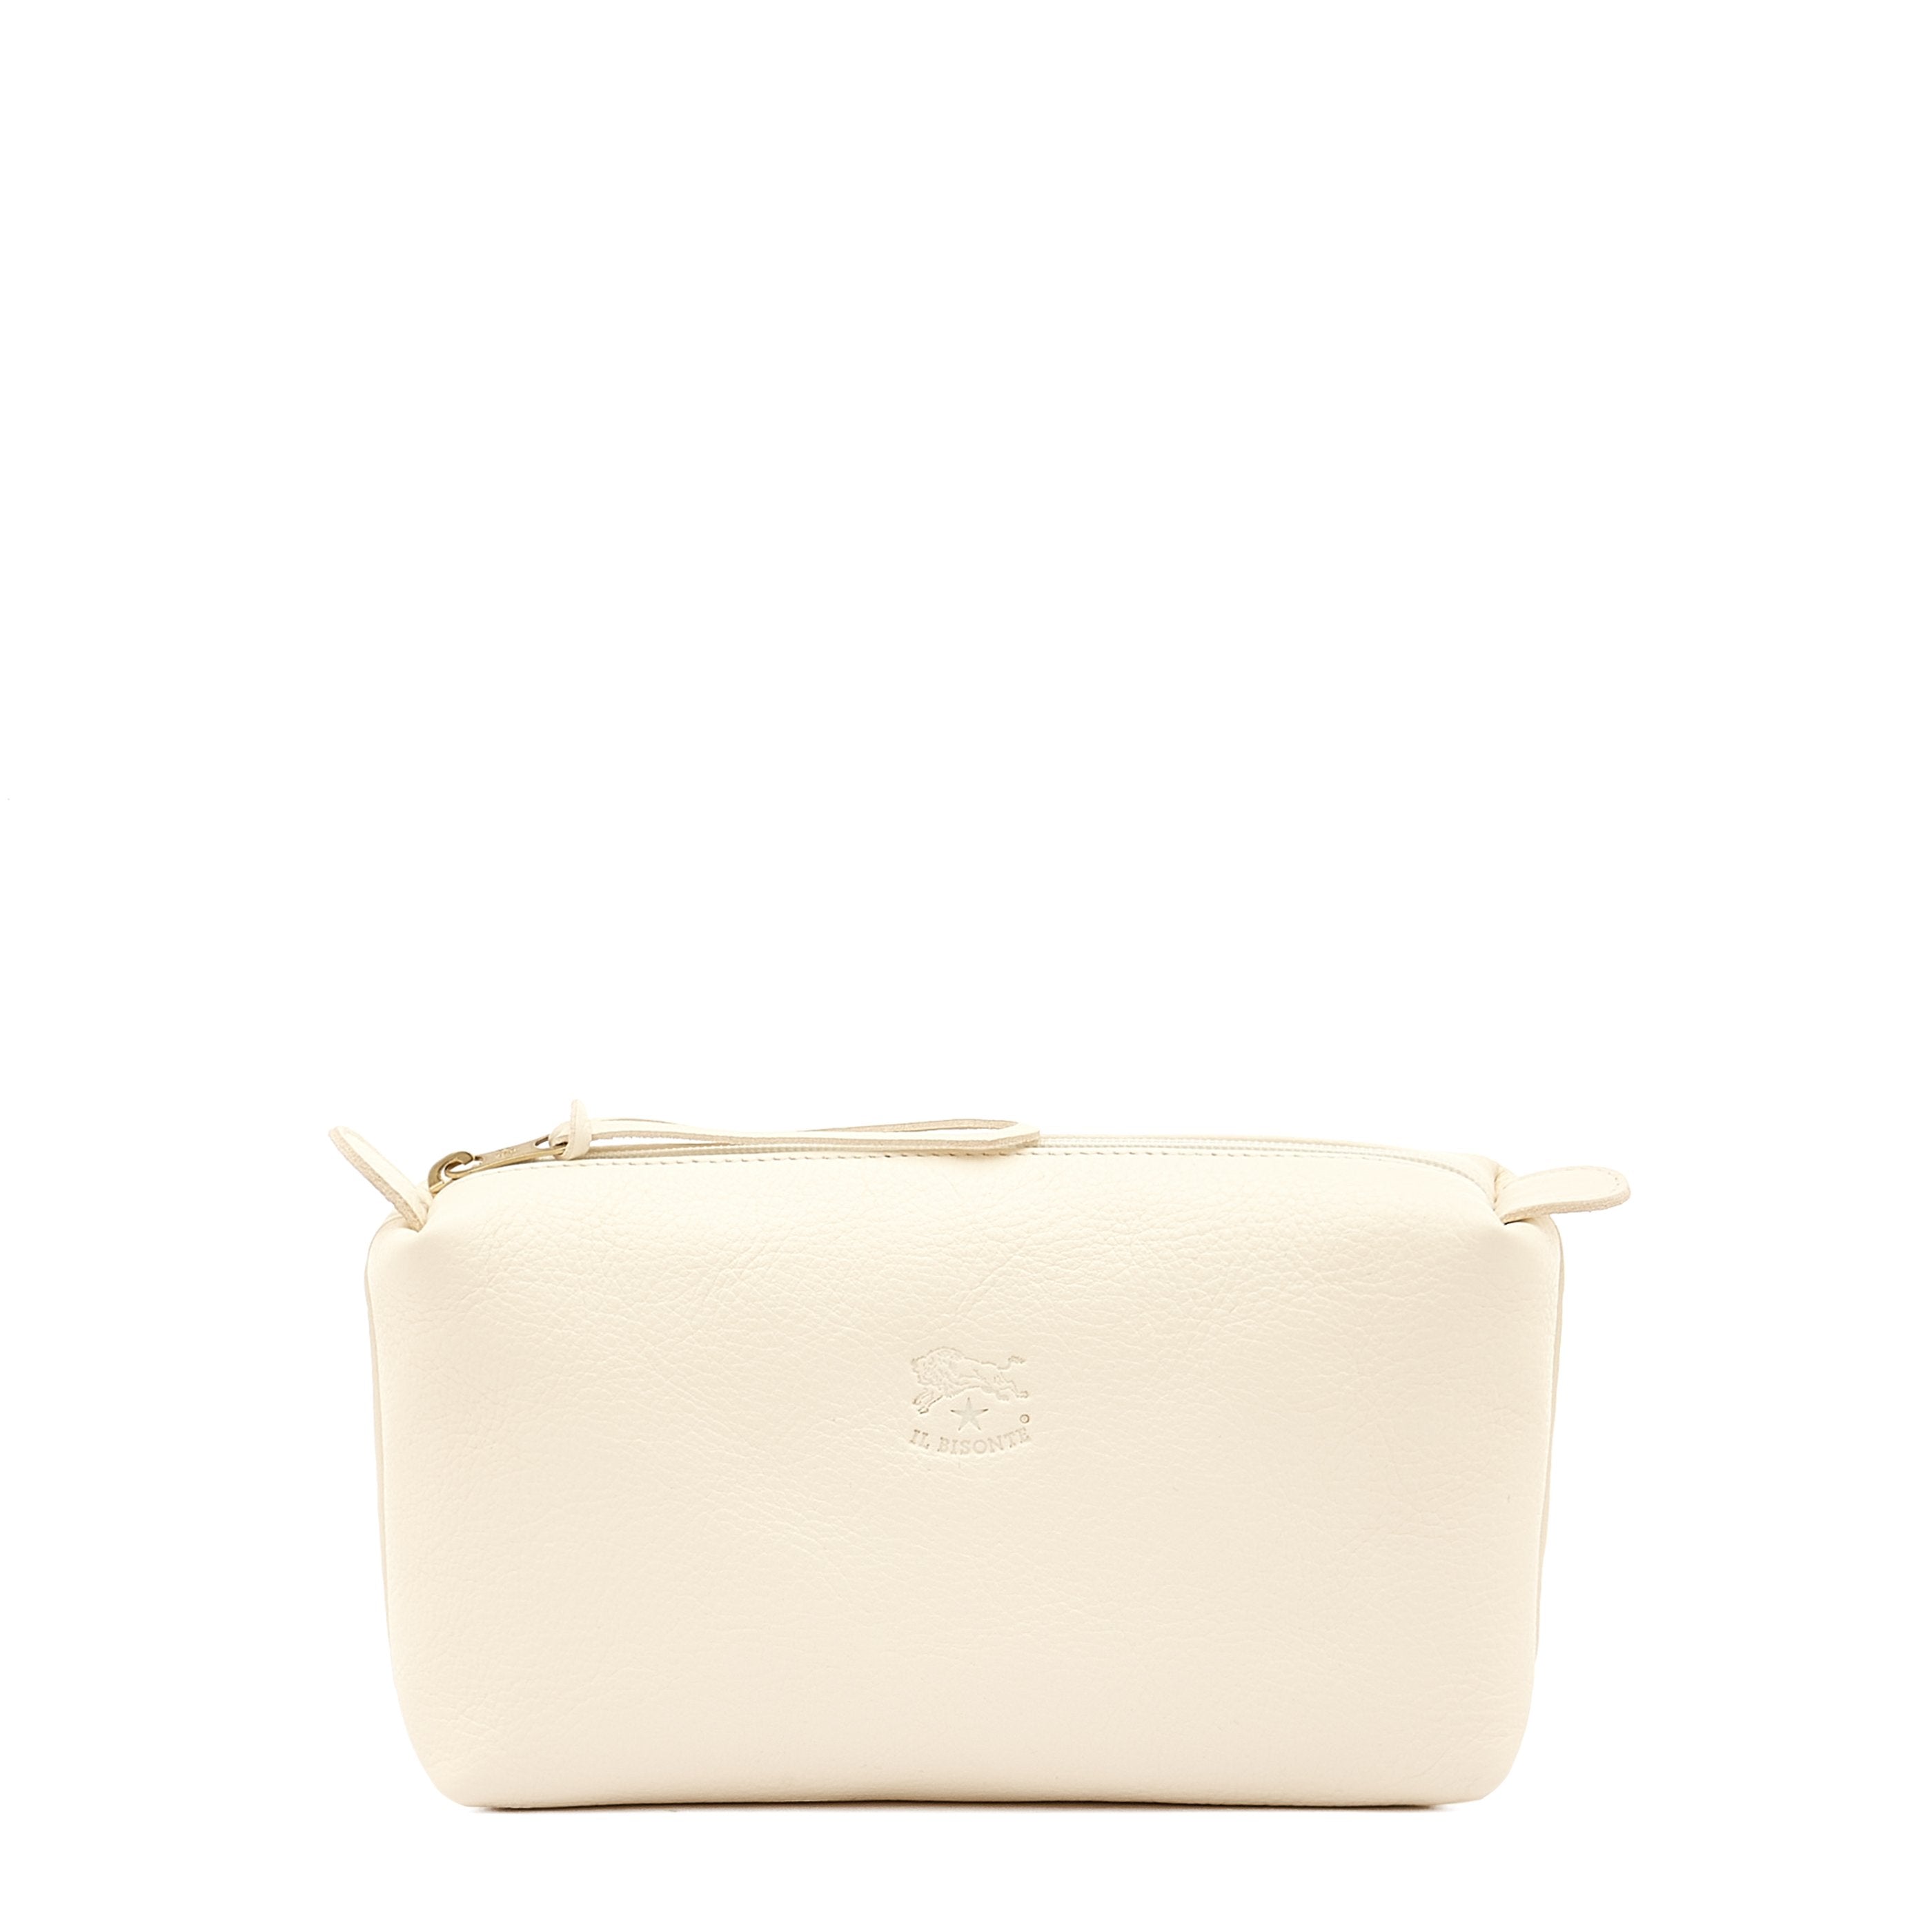 Women's case in leather color white